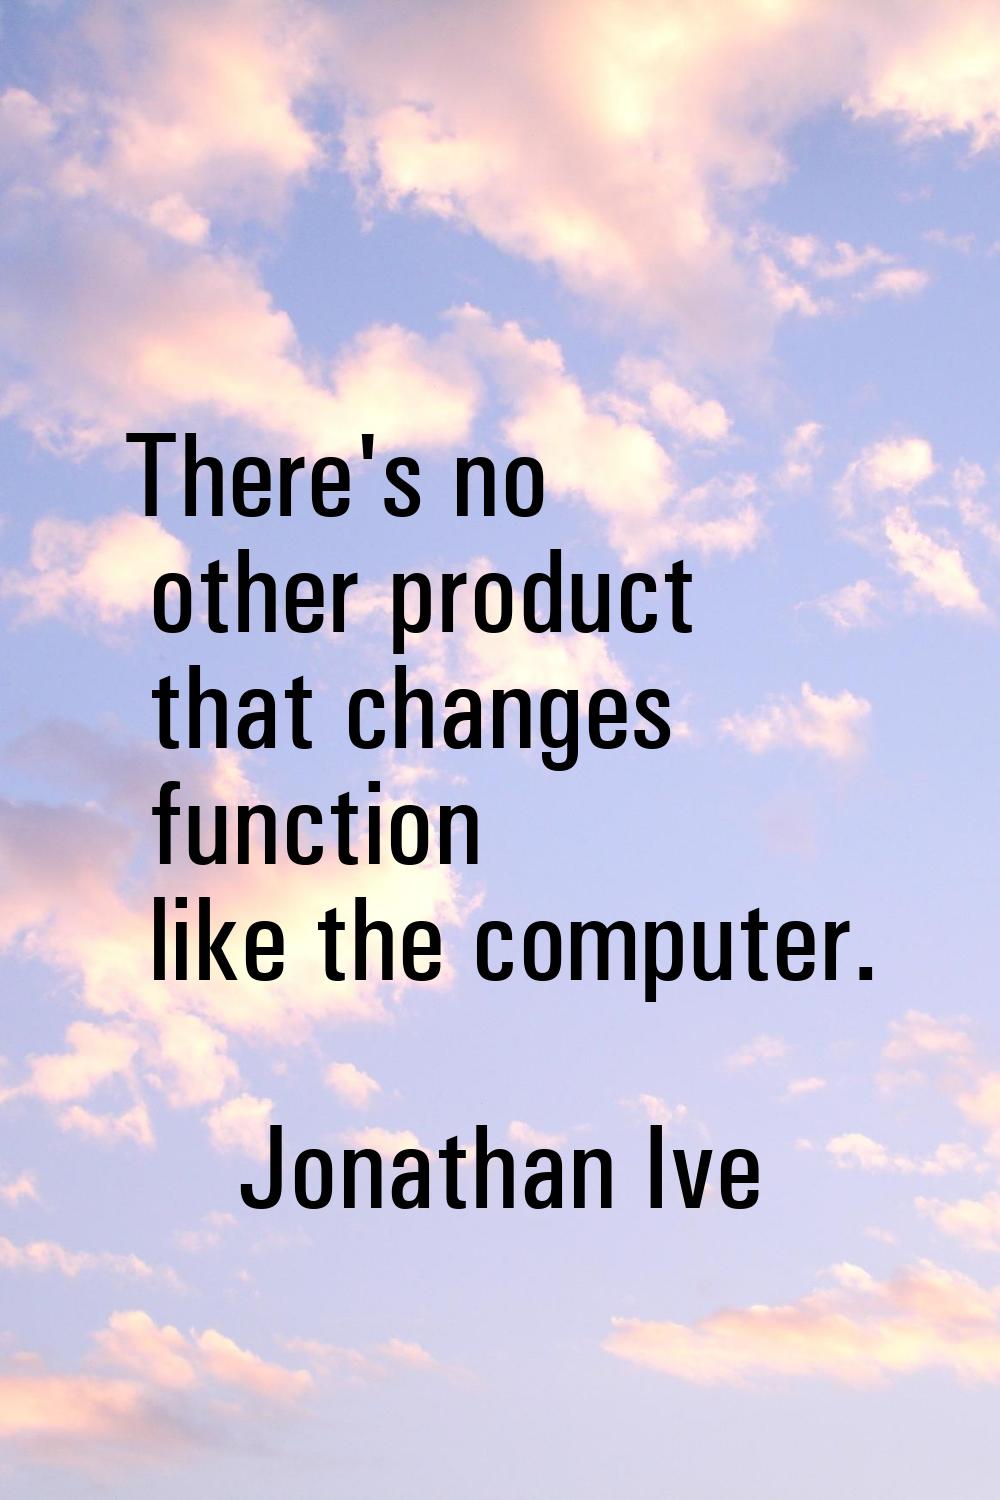 There's no other product that changes function like the computer.